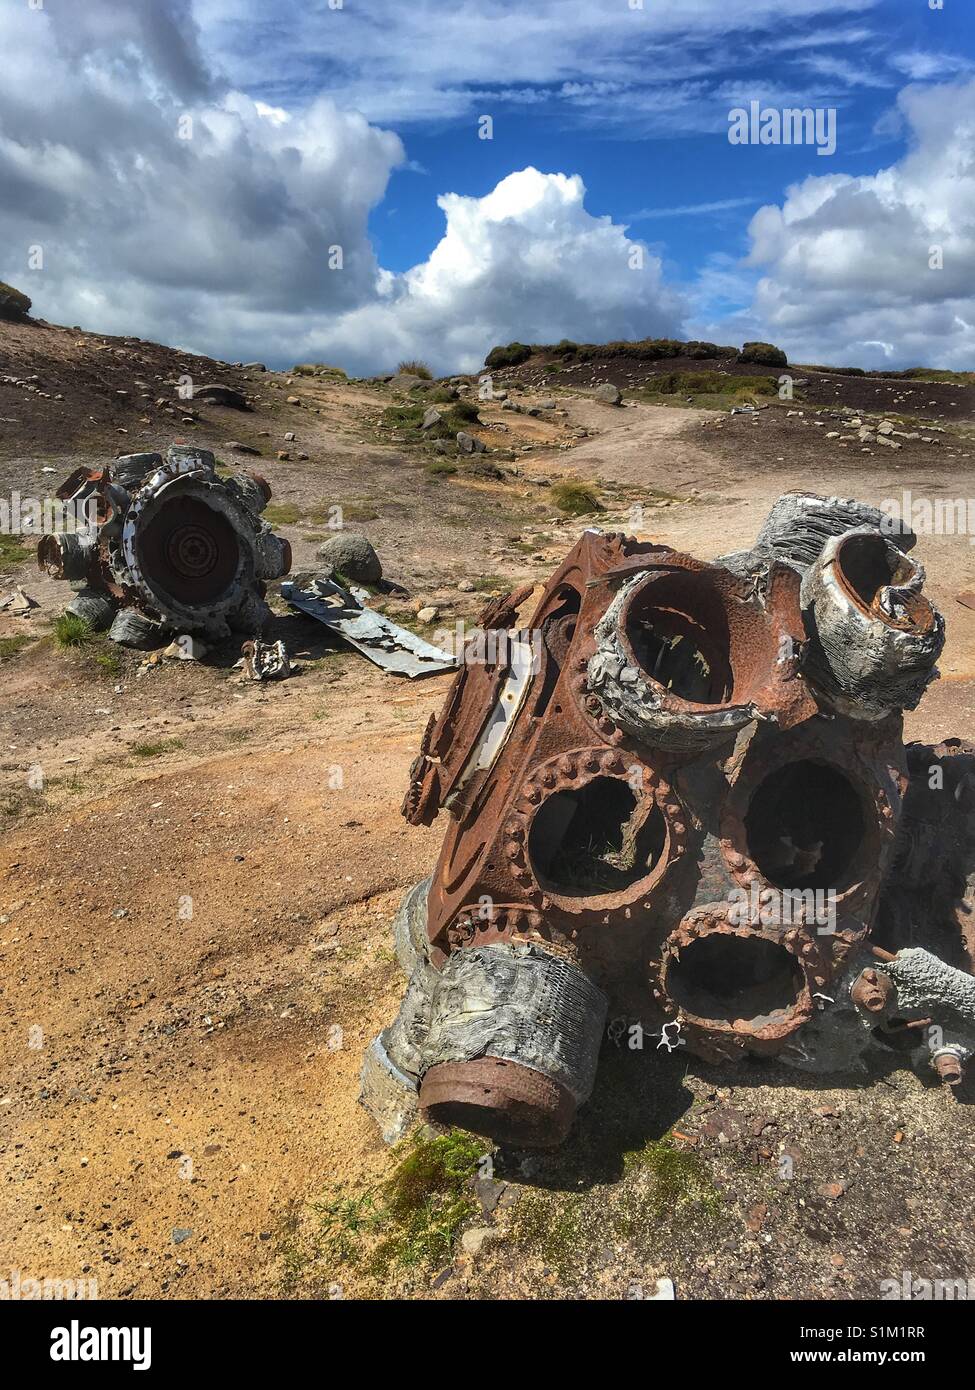 Boeing RB29 Superfortress engines at an aircraft crash site Stock Photo